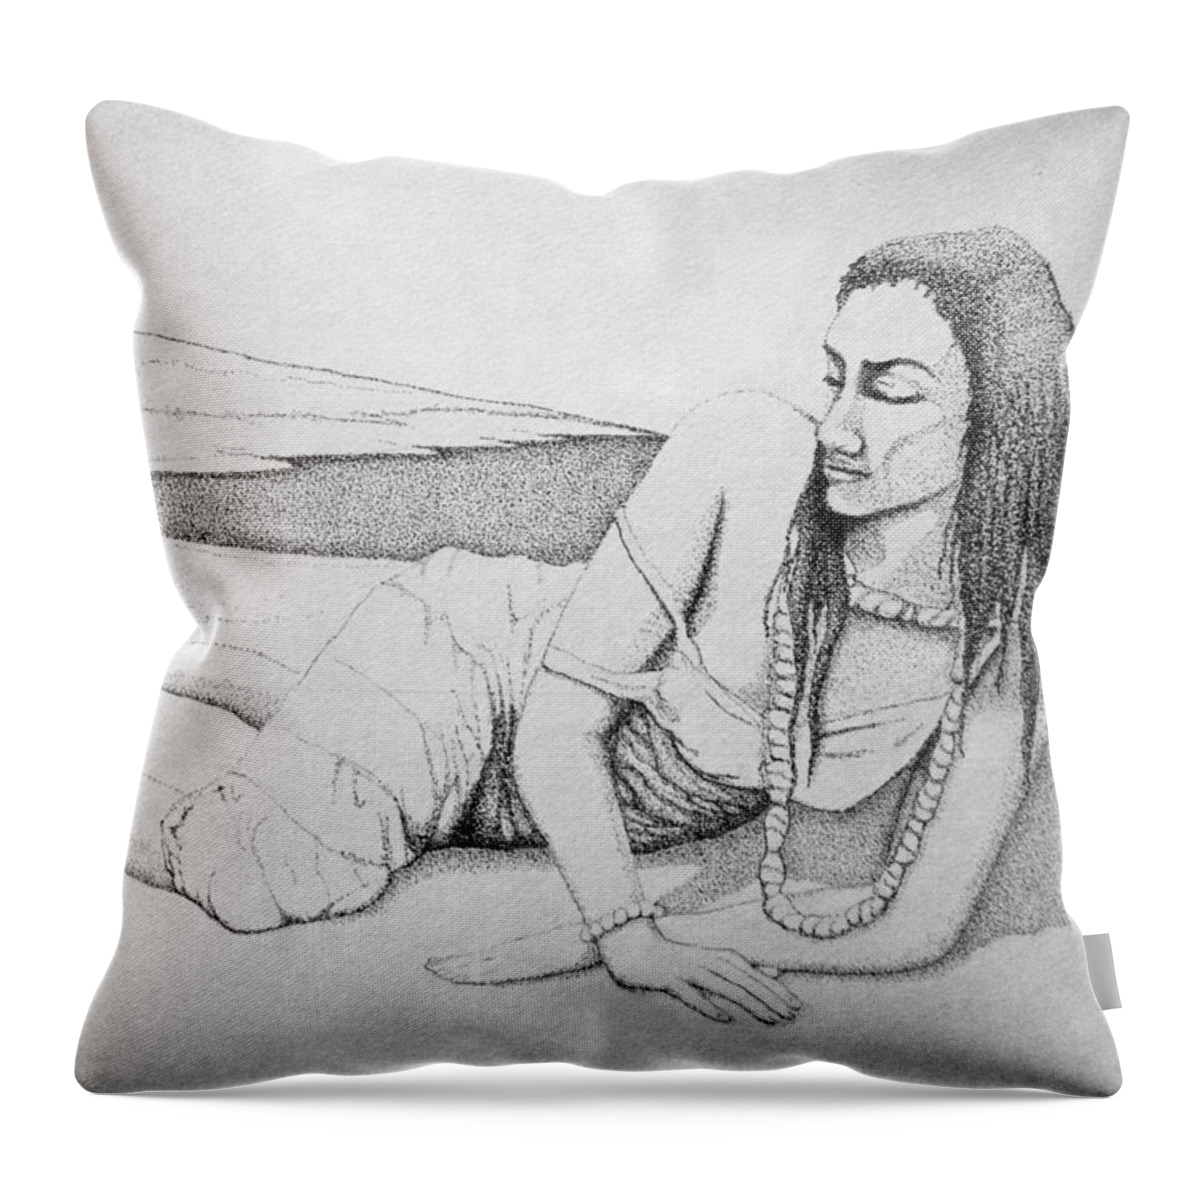 Beach Throw Pillow featuring the drawing Girl On Beach by Mr Dill